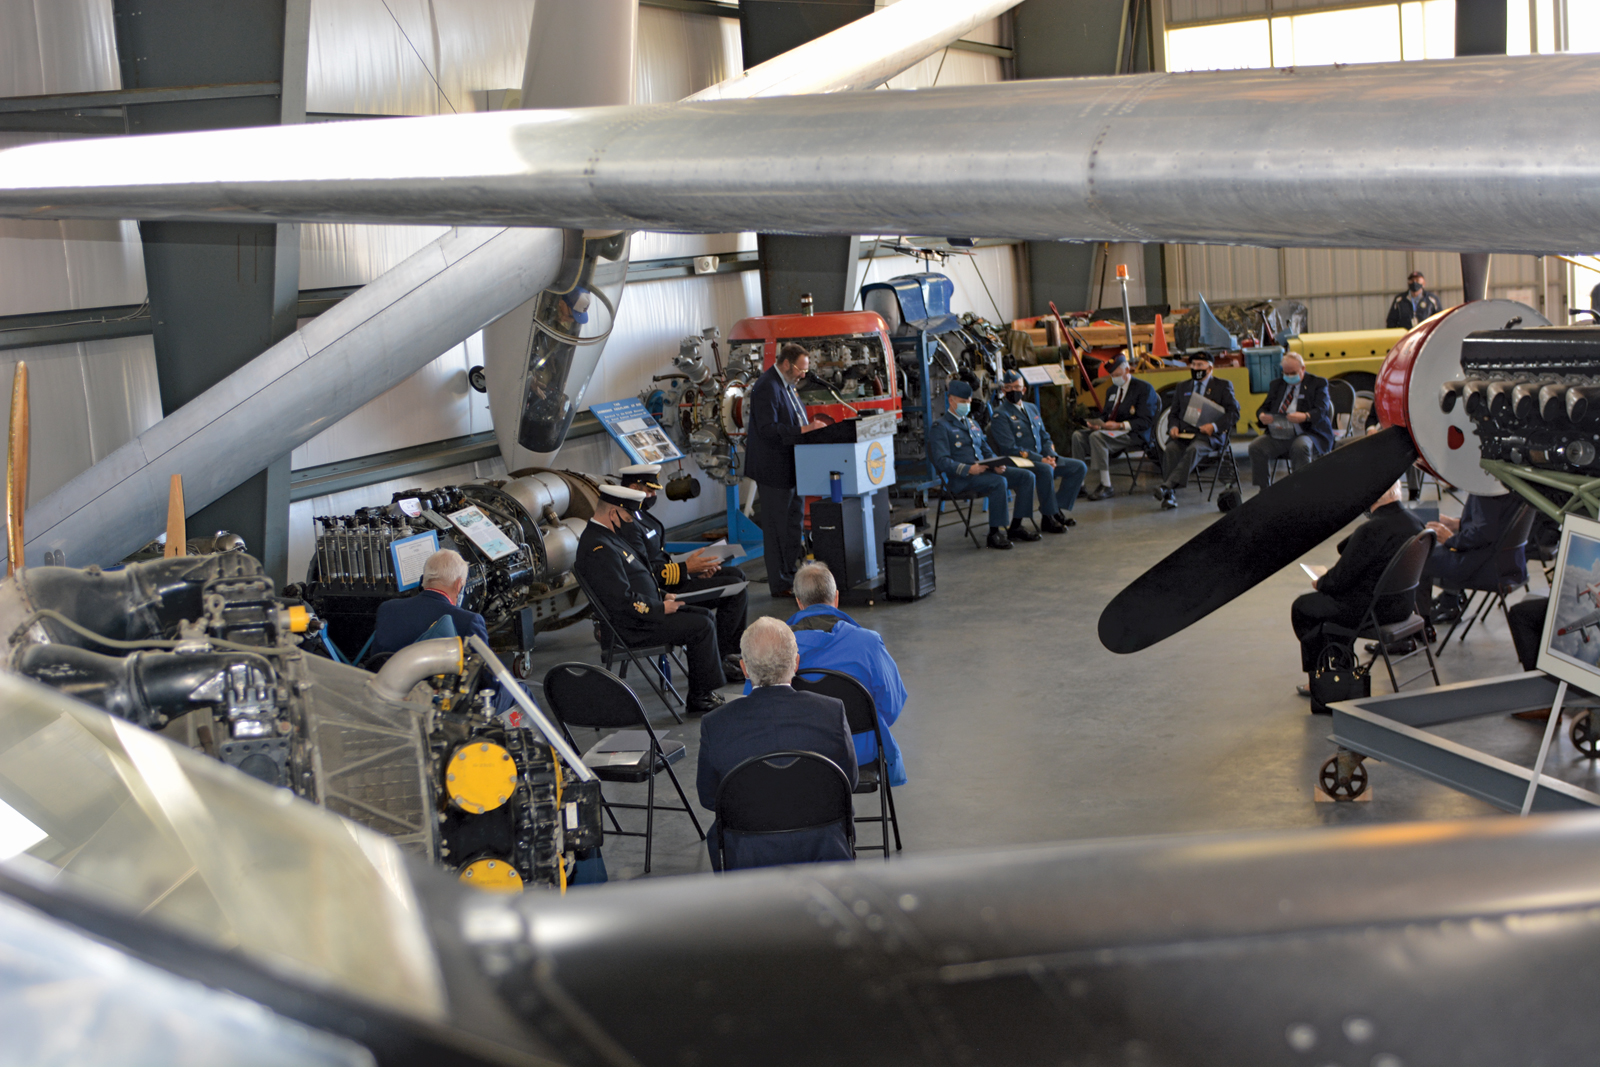 Military members past and present, following health and safety protocols, gathered at the B.C. Aviation Museum for a ceremony to commemorate the 100th anniversary of first trans-Canada flight. Photo by CFB Esquimalt Base Public Affairs